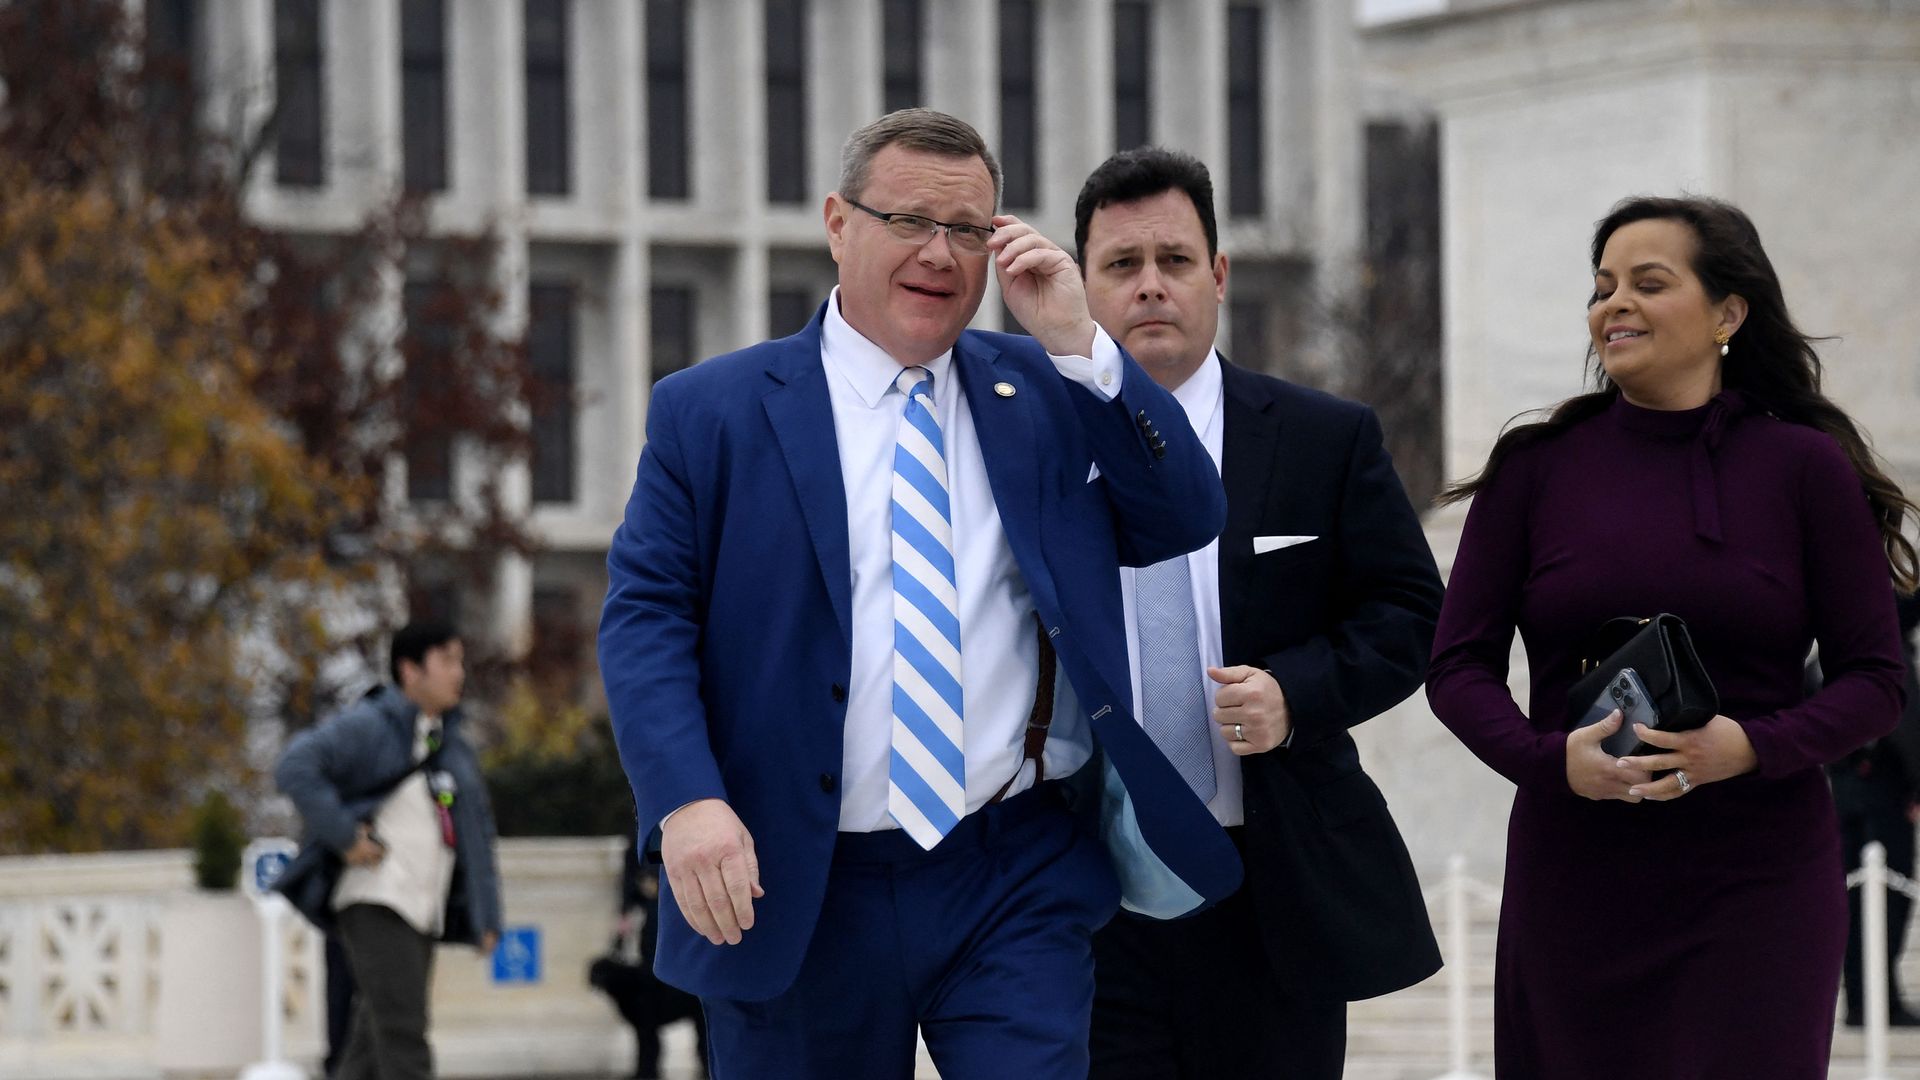 North Carolina House Speaker Tim Moore in a blue suit with a blue and white tie, walking with two people.